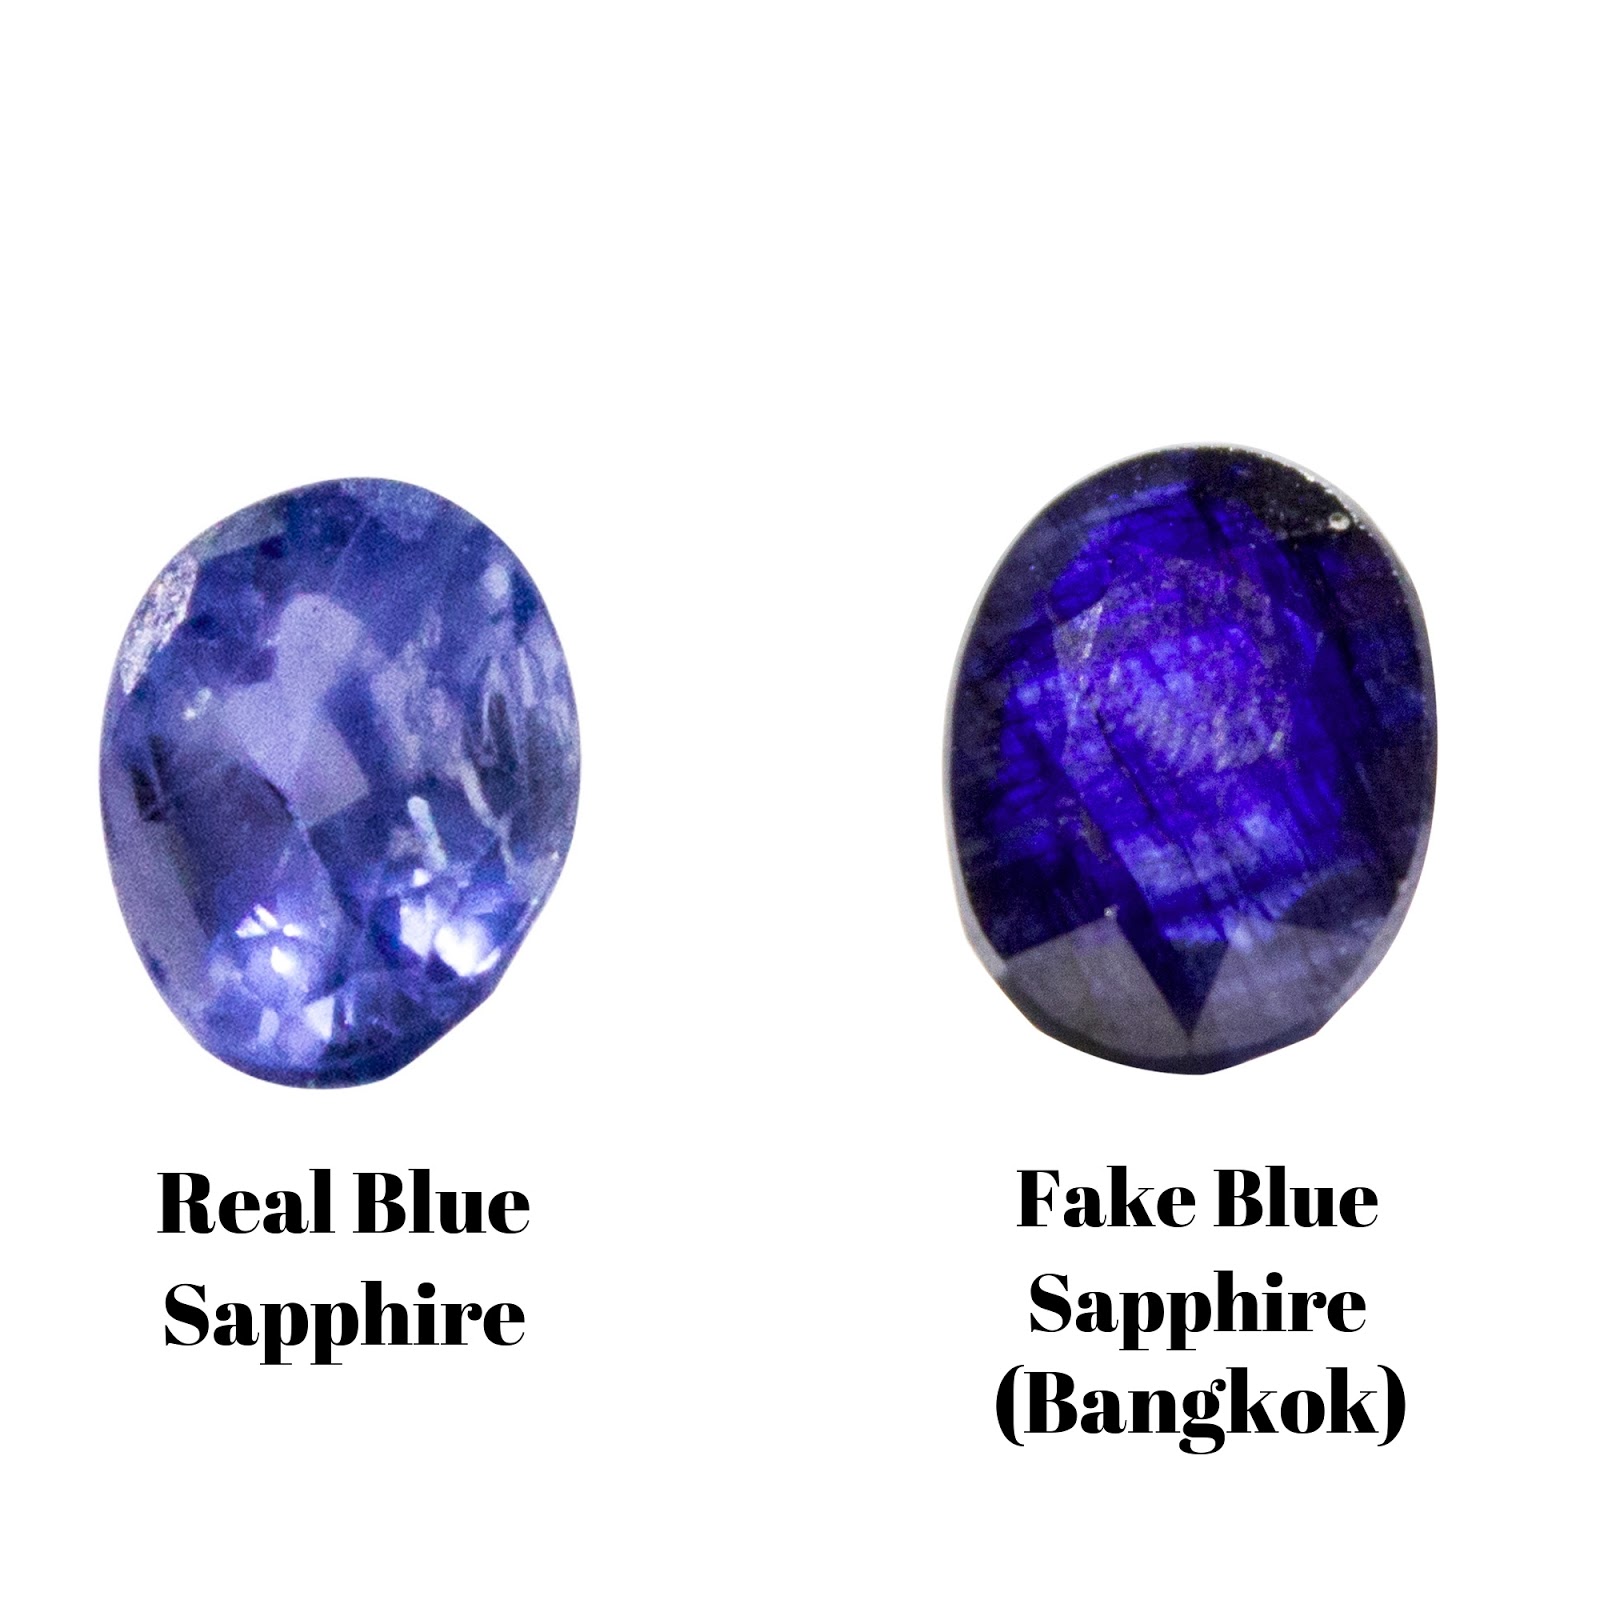 how to tell if a gemstone is real or fake